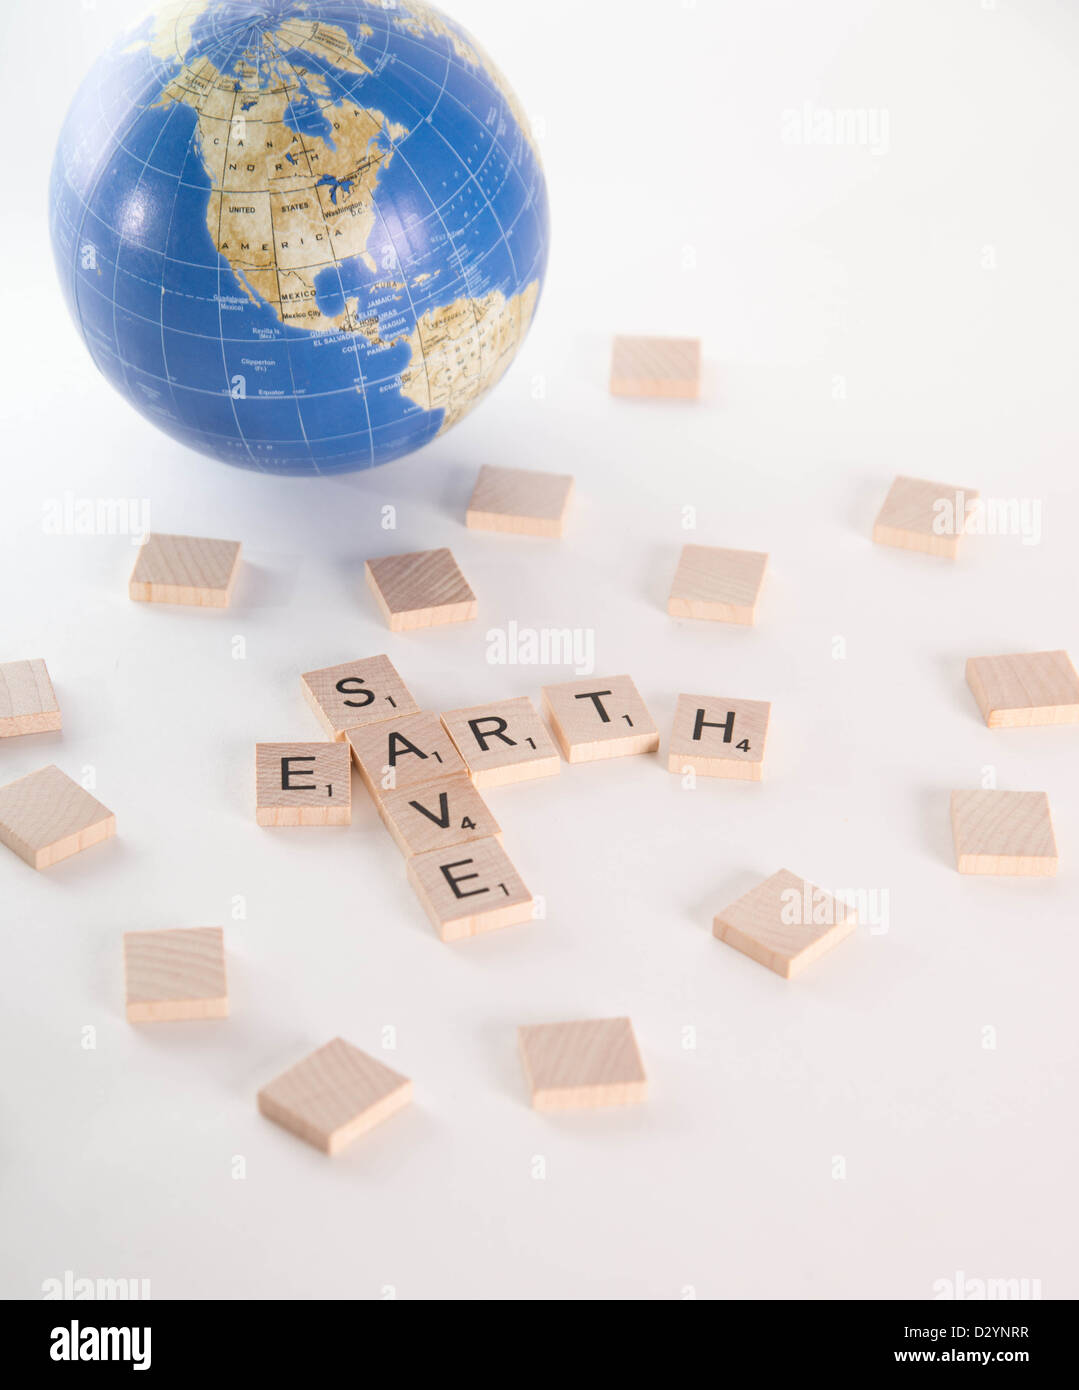 Save Earth concept spelled out in Scrabble letters with out of focus world globe in the background. Isolated on white background Stock Photo